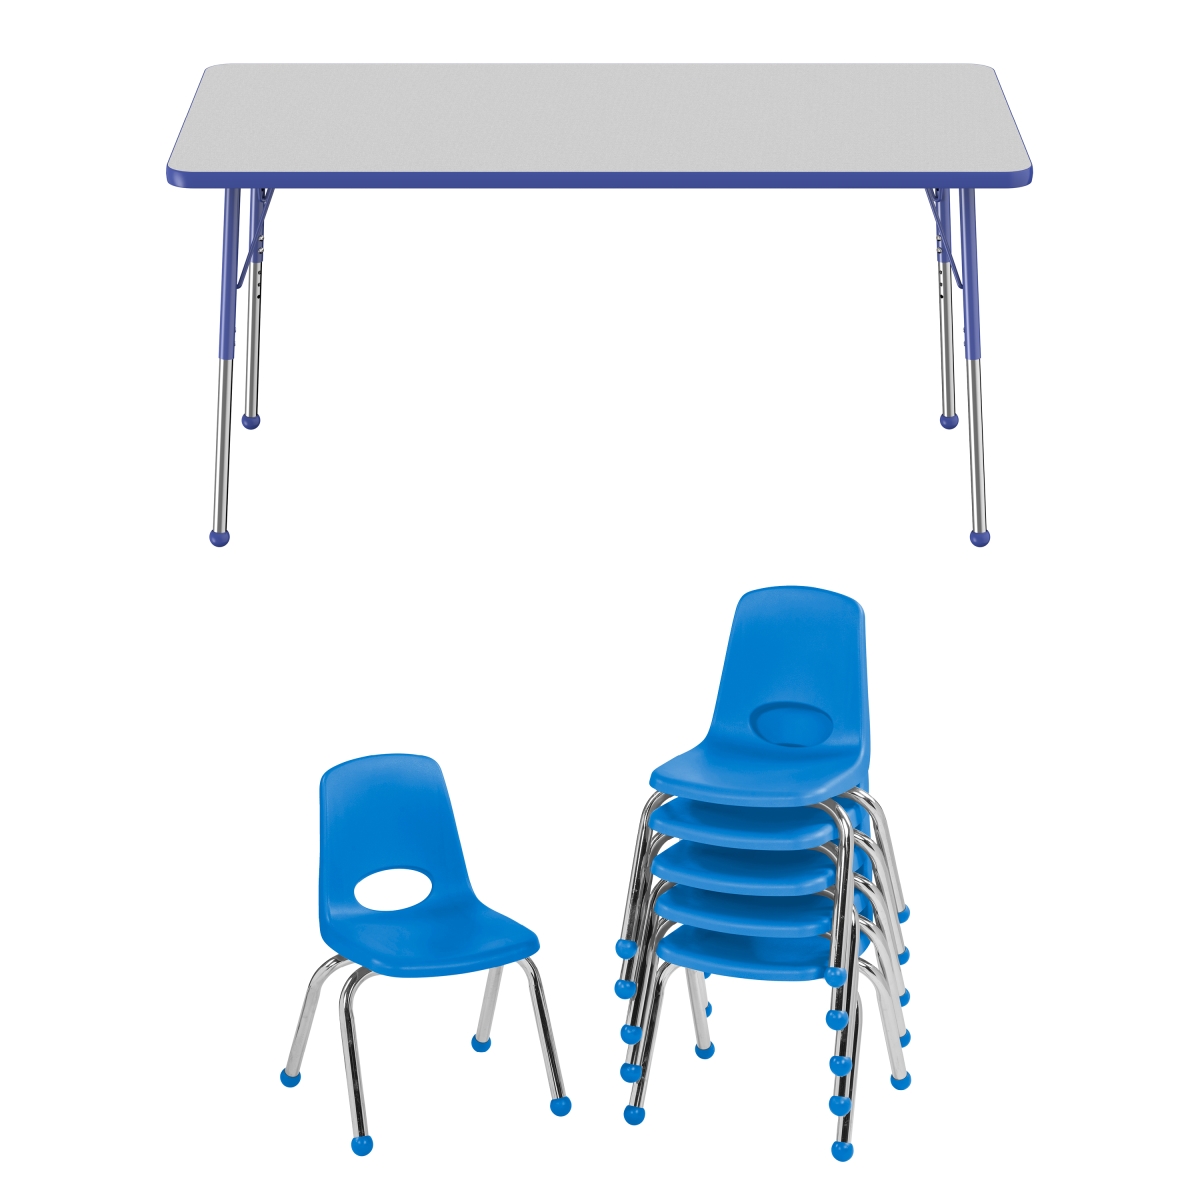 10299-gybl 30 X 60 In. Rectangle T-mold Adjustable Activity Table Standard Ball With 6 Stack Chairs 12 In. Ball Glide - Grey & Blue